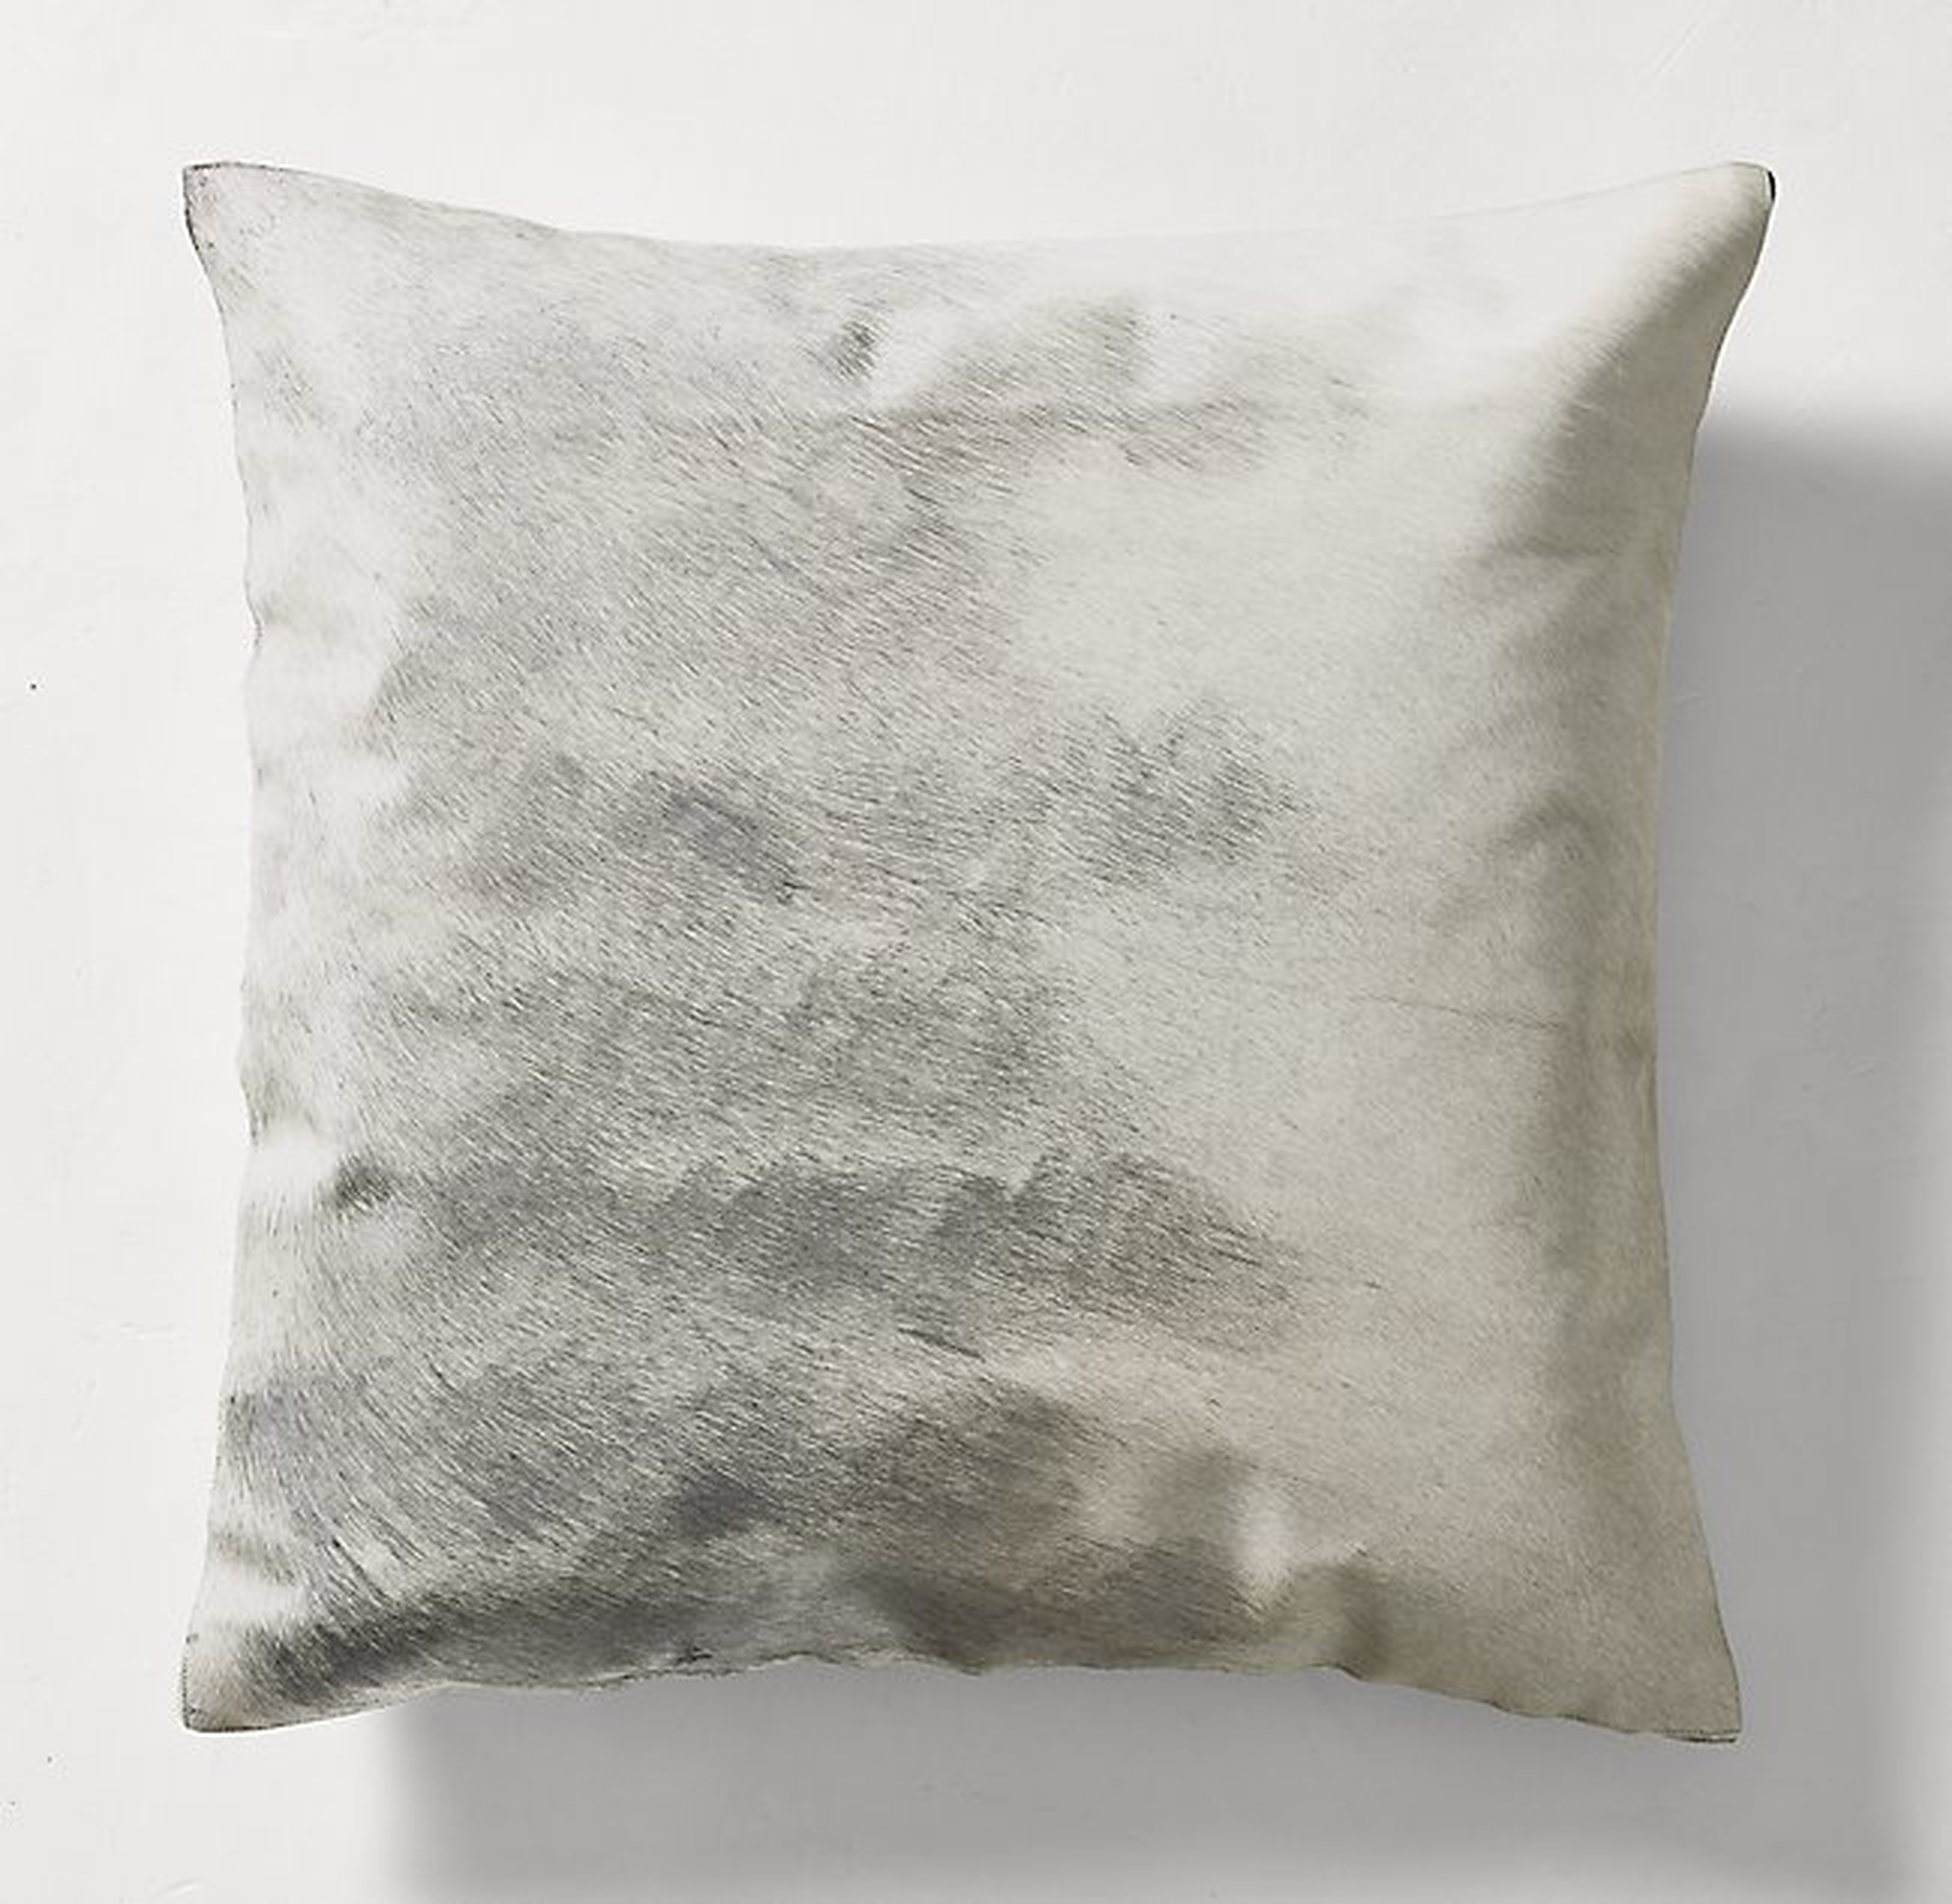 HAND-PAINTED METALLIC HIDE PILLOW COVER - SQUARE - RH